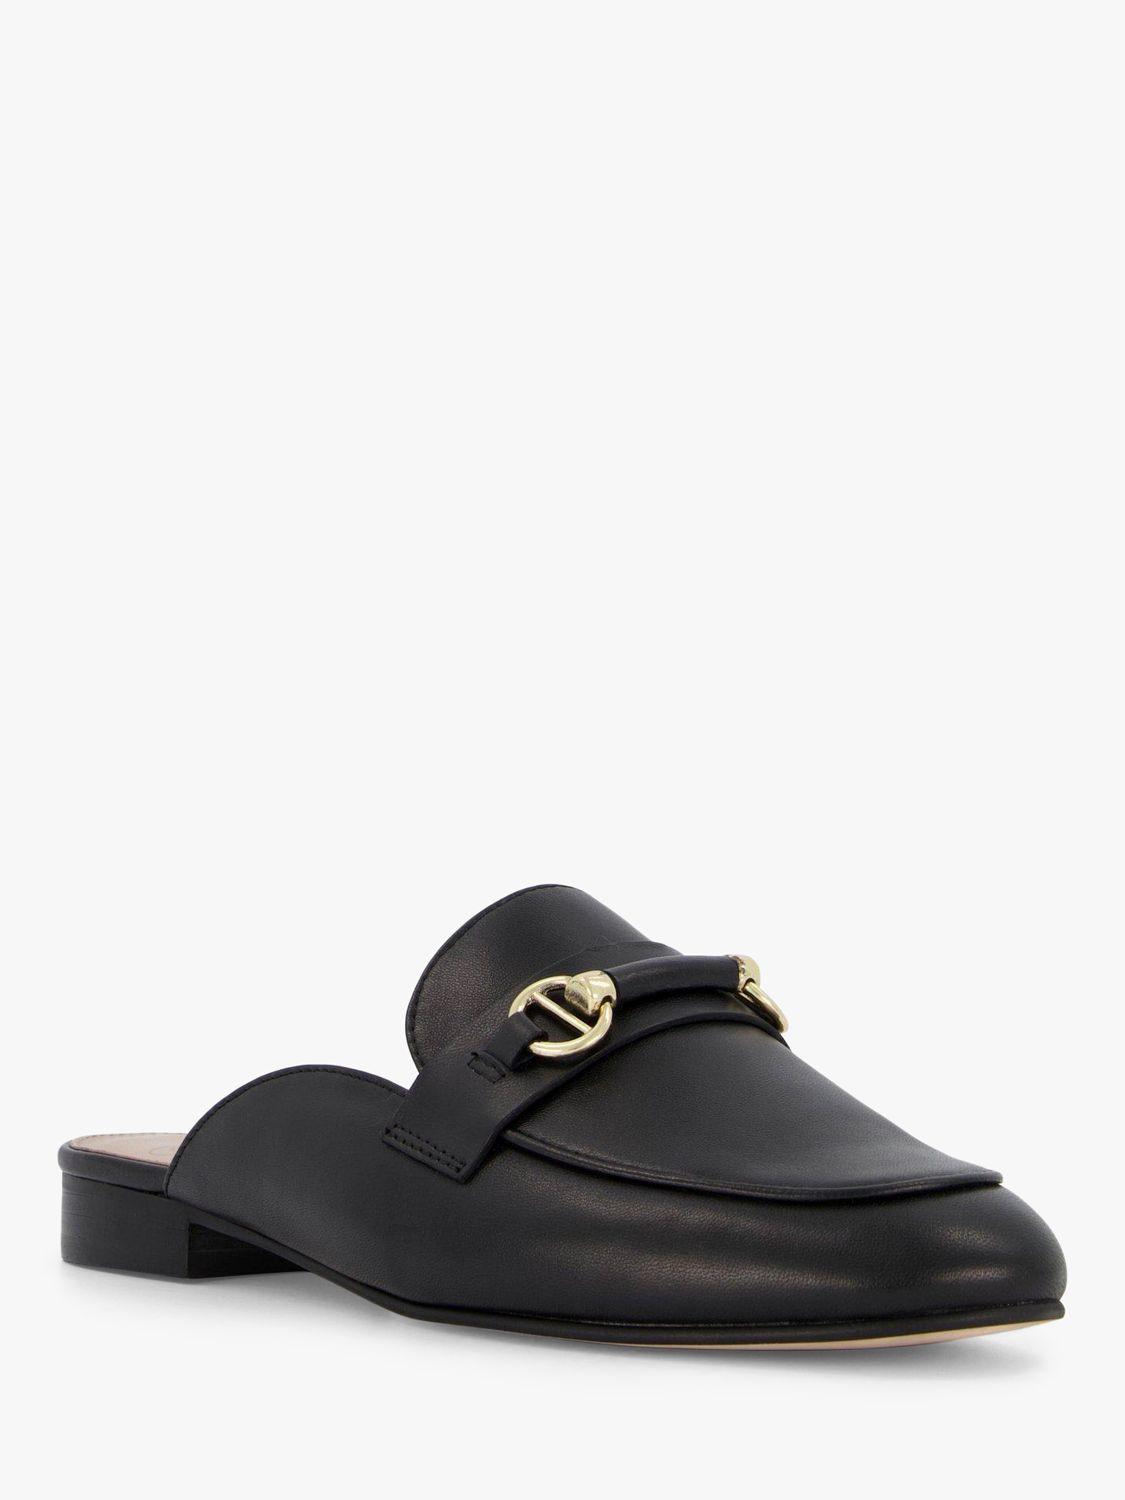 Dune Glowin Leather Backless Loafers, Black at John Lewis & Partners